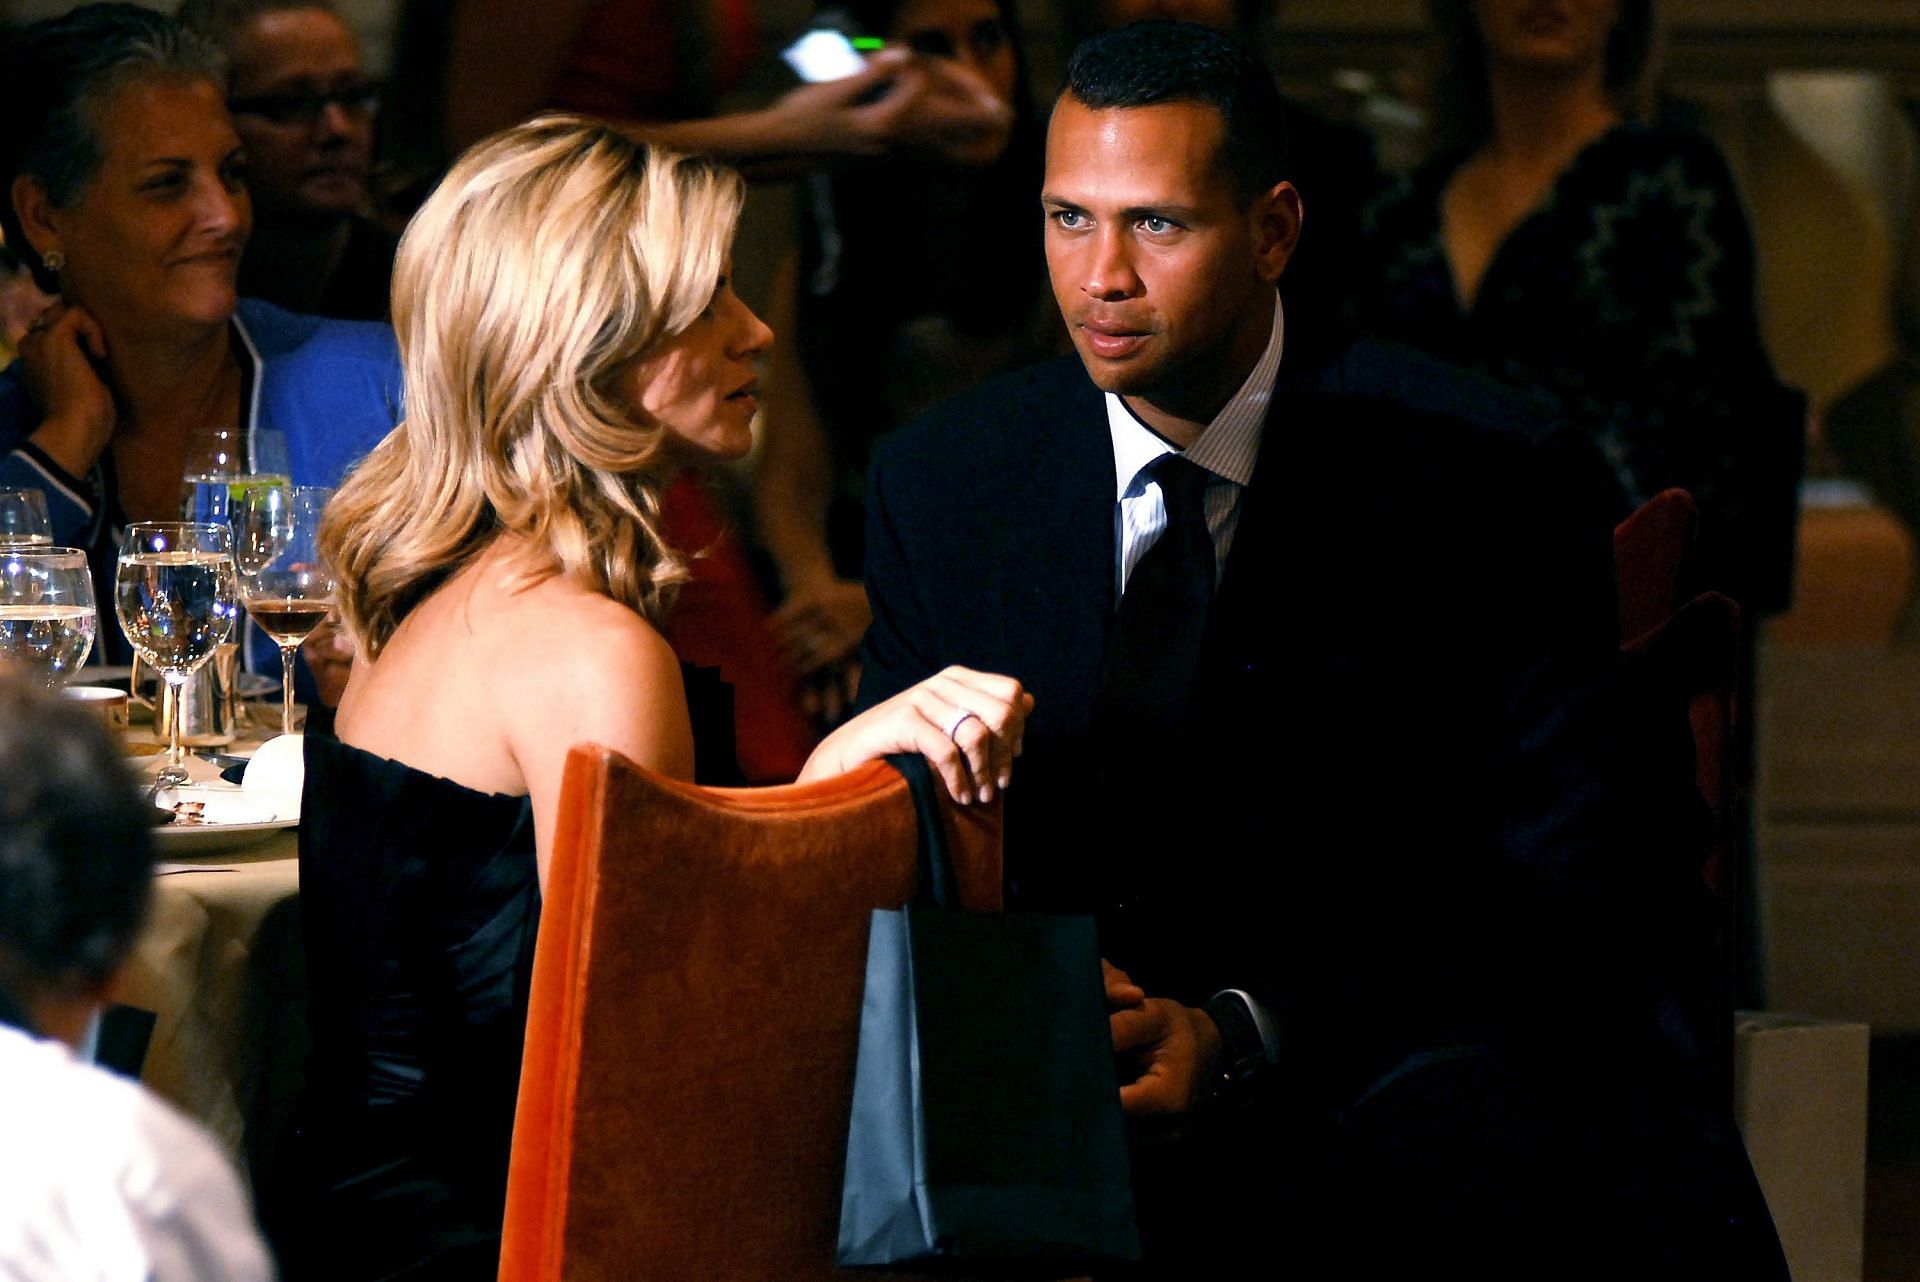 What Happened to Alex Rodriguez's First Wife, Cynthia? Let's Examine